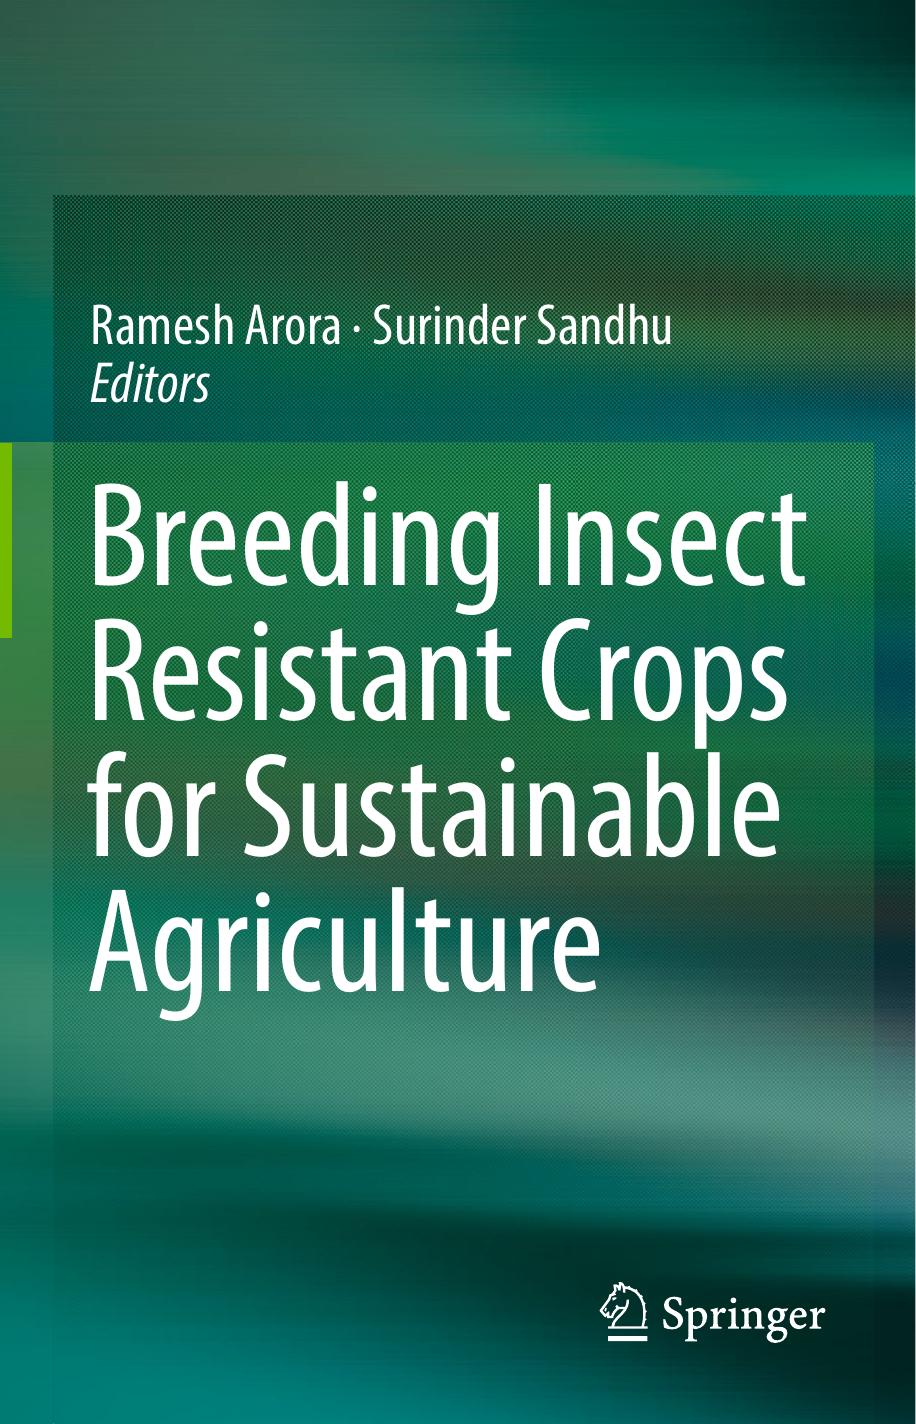 Breeding Insect Resistant Crops for Sustainable Agriculture 2017